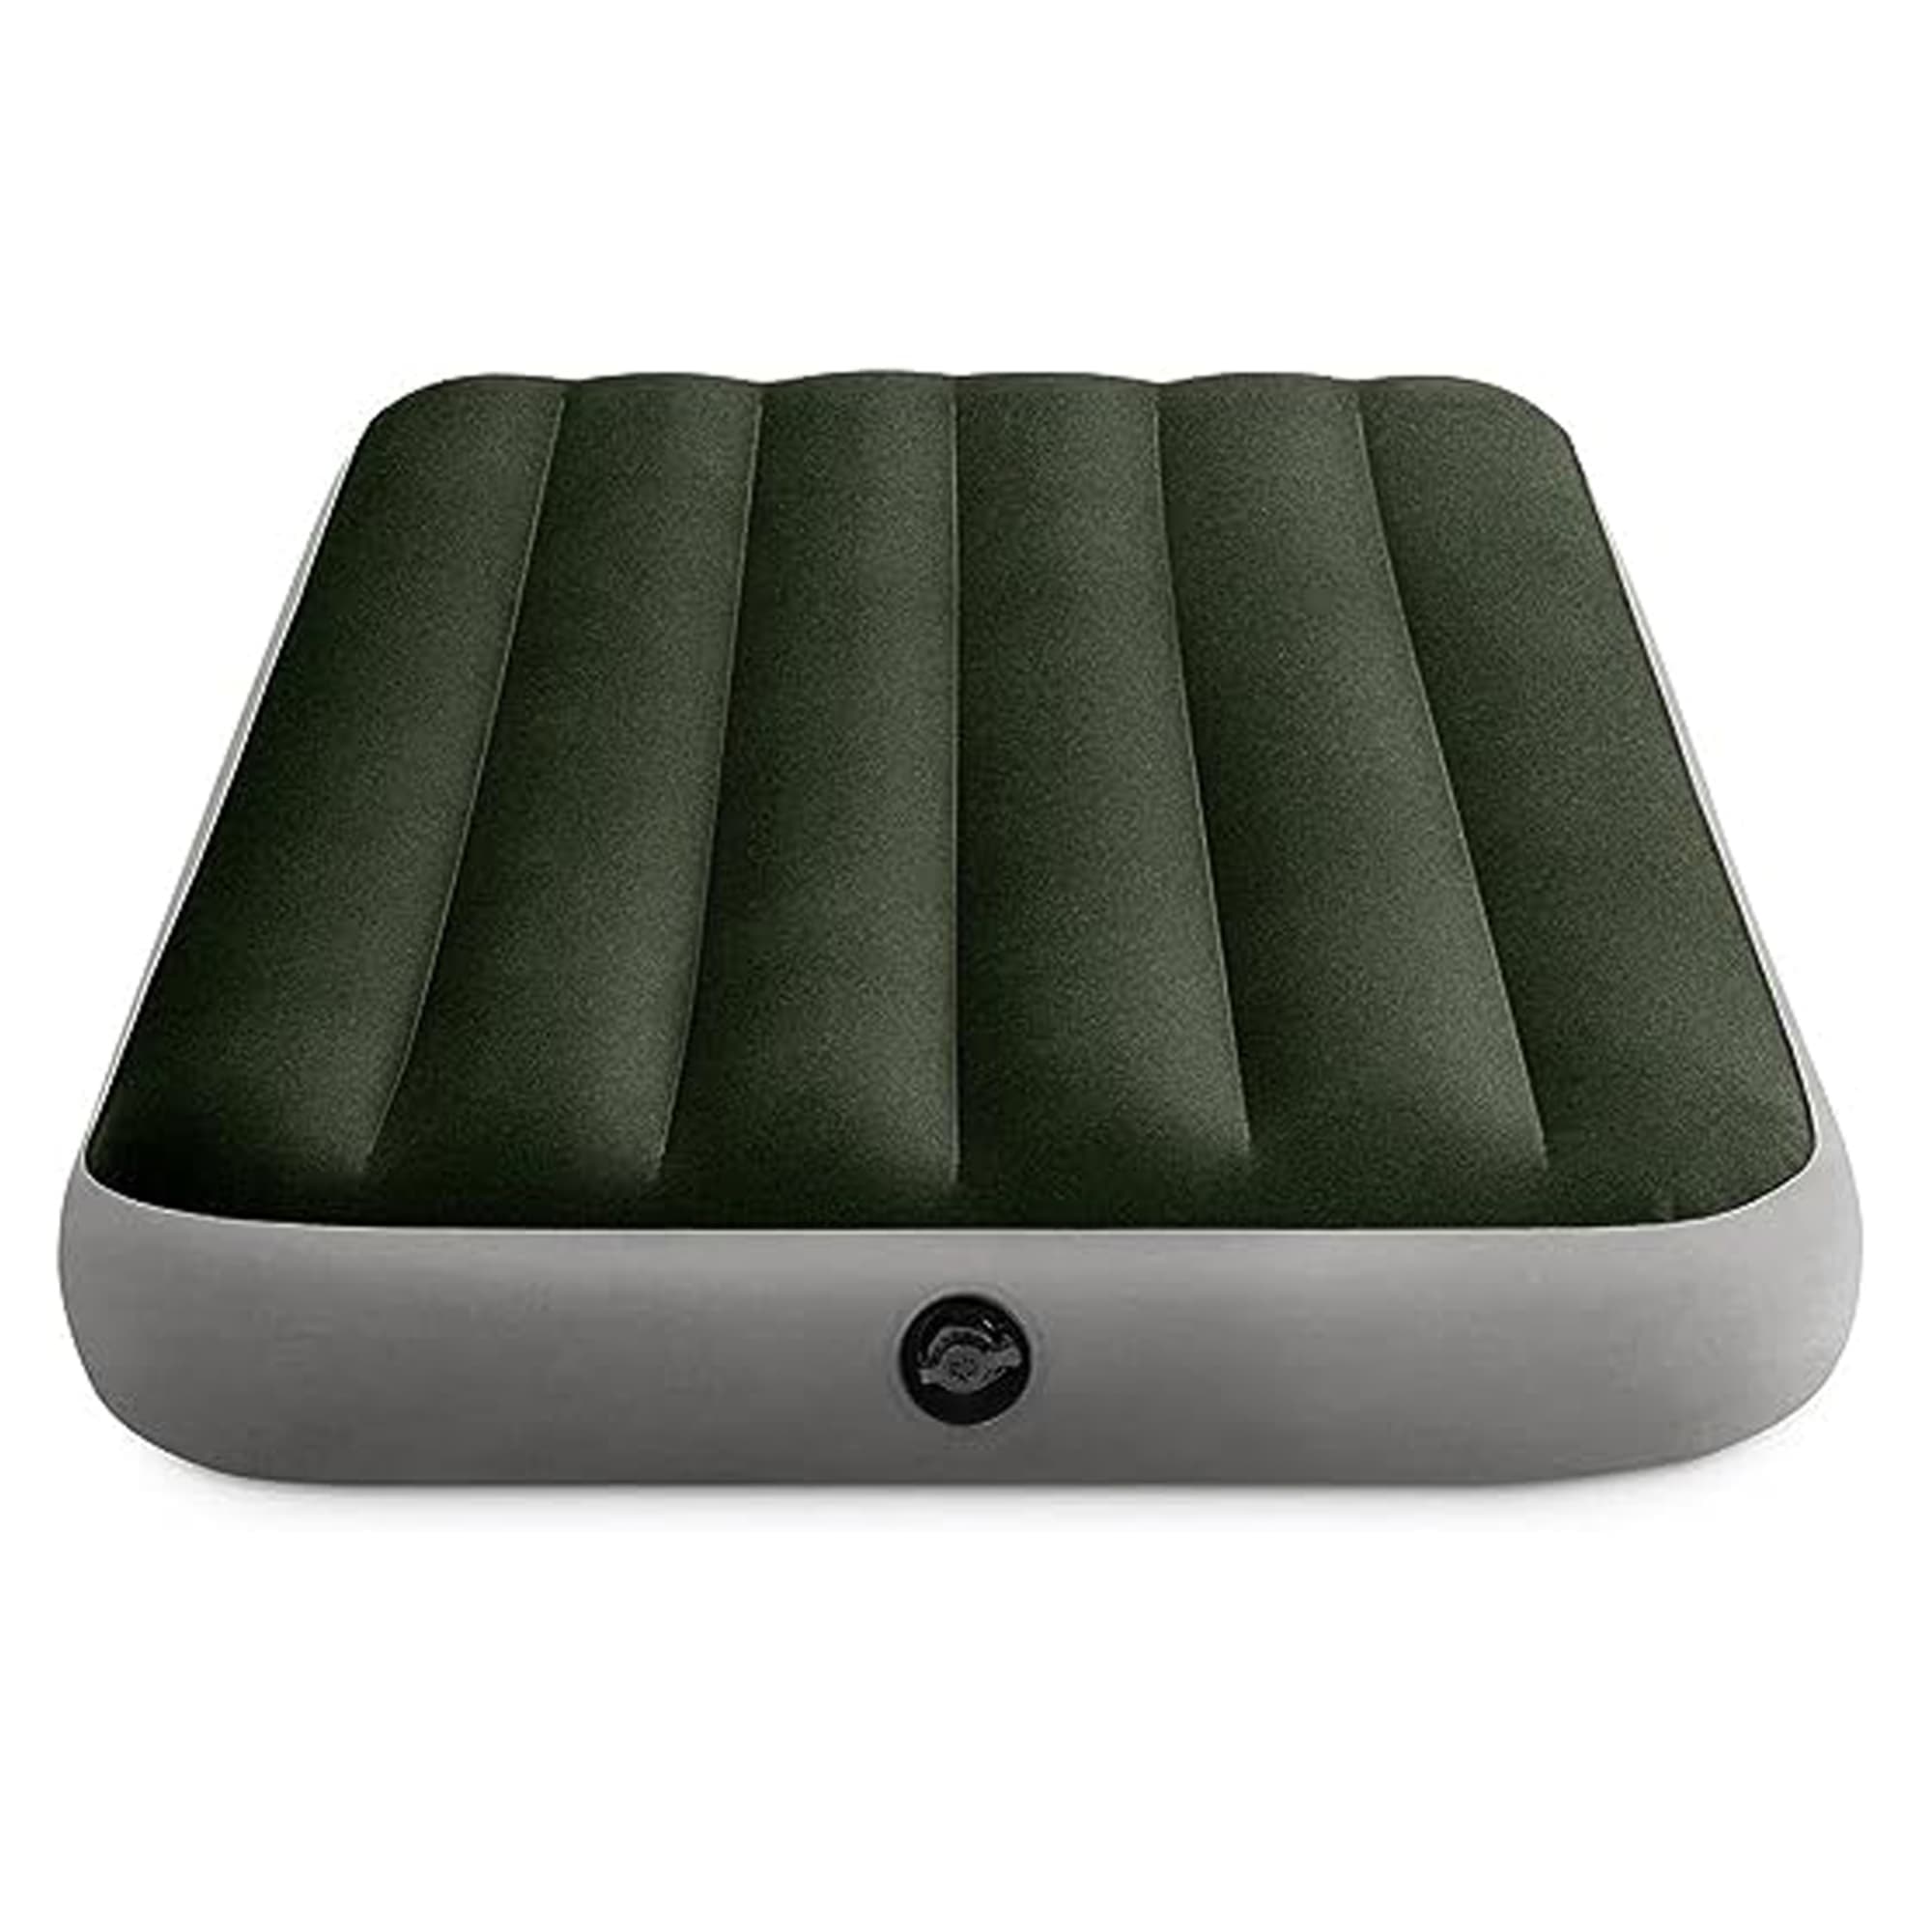 Intex Prestige Durabeam Downy Full Air Bed with Battery Pump, Green $35.00 EACH, CASE PACK OF 3